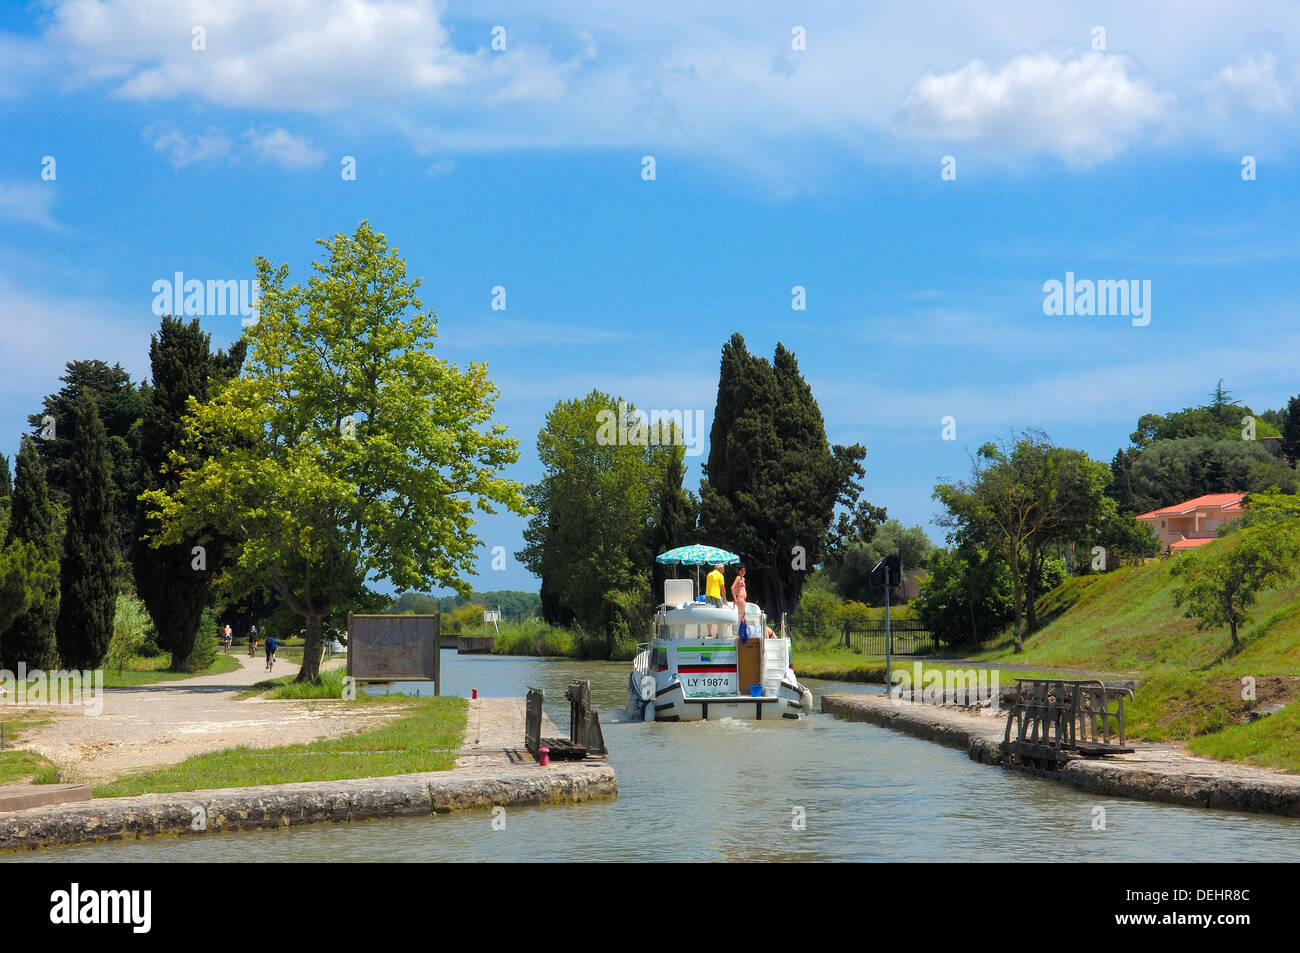 Neuf Ecluses, Canal du Midi, Beziers, Herault, Languedoc-Roussillon, Frankreich Stockfoto